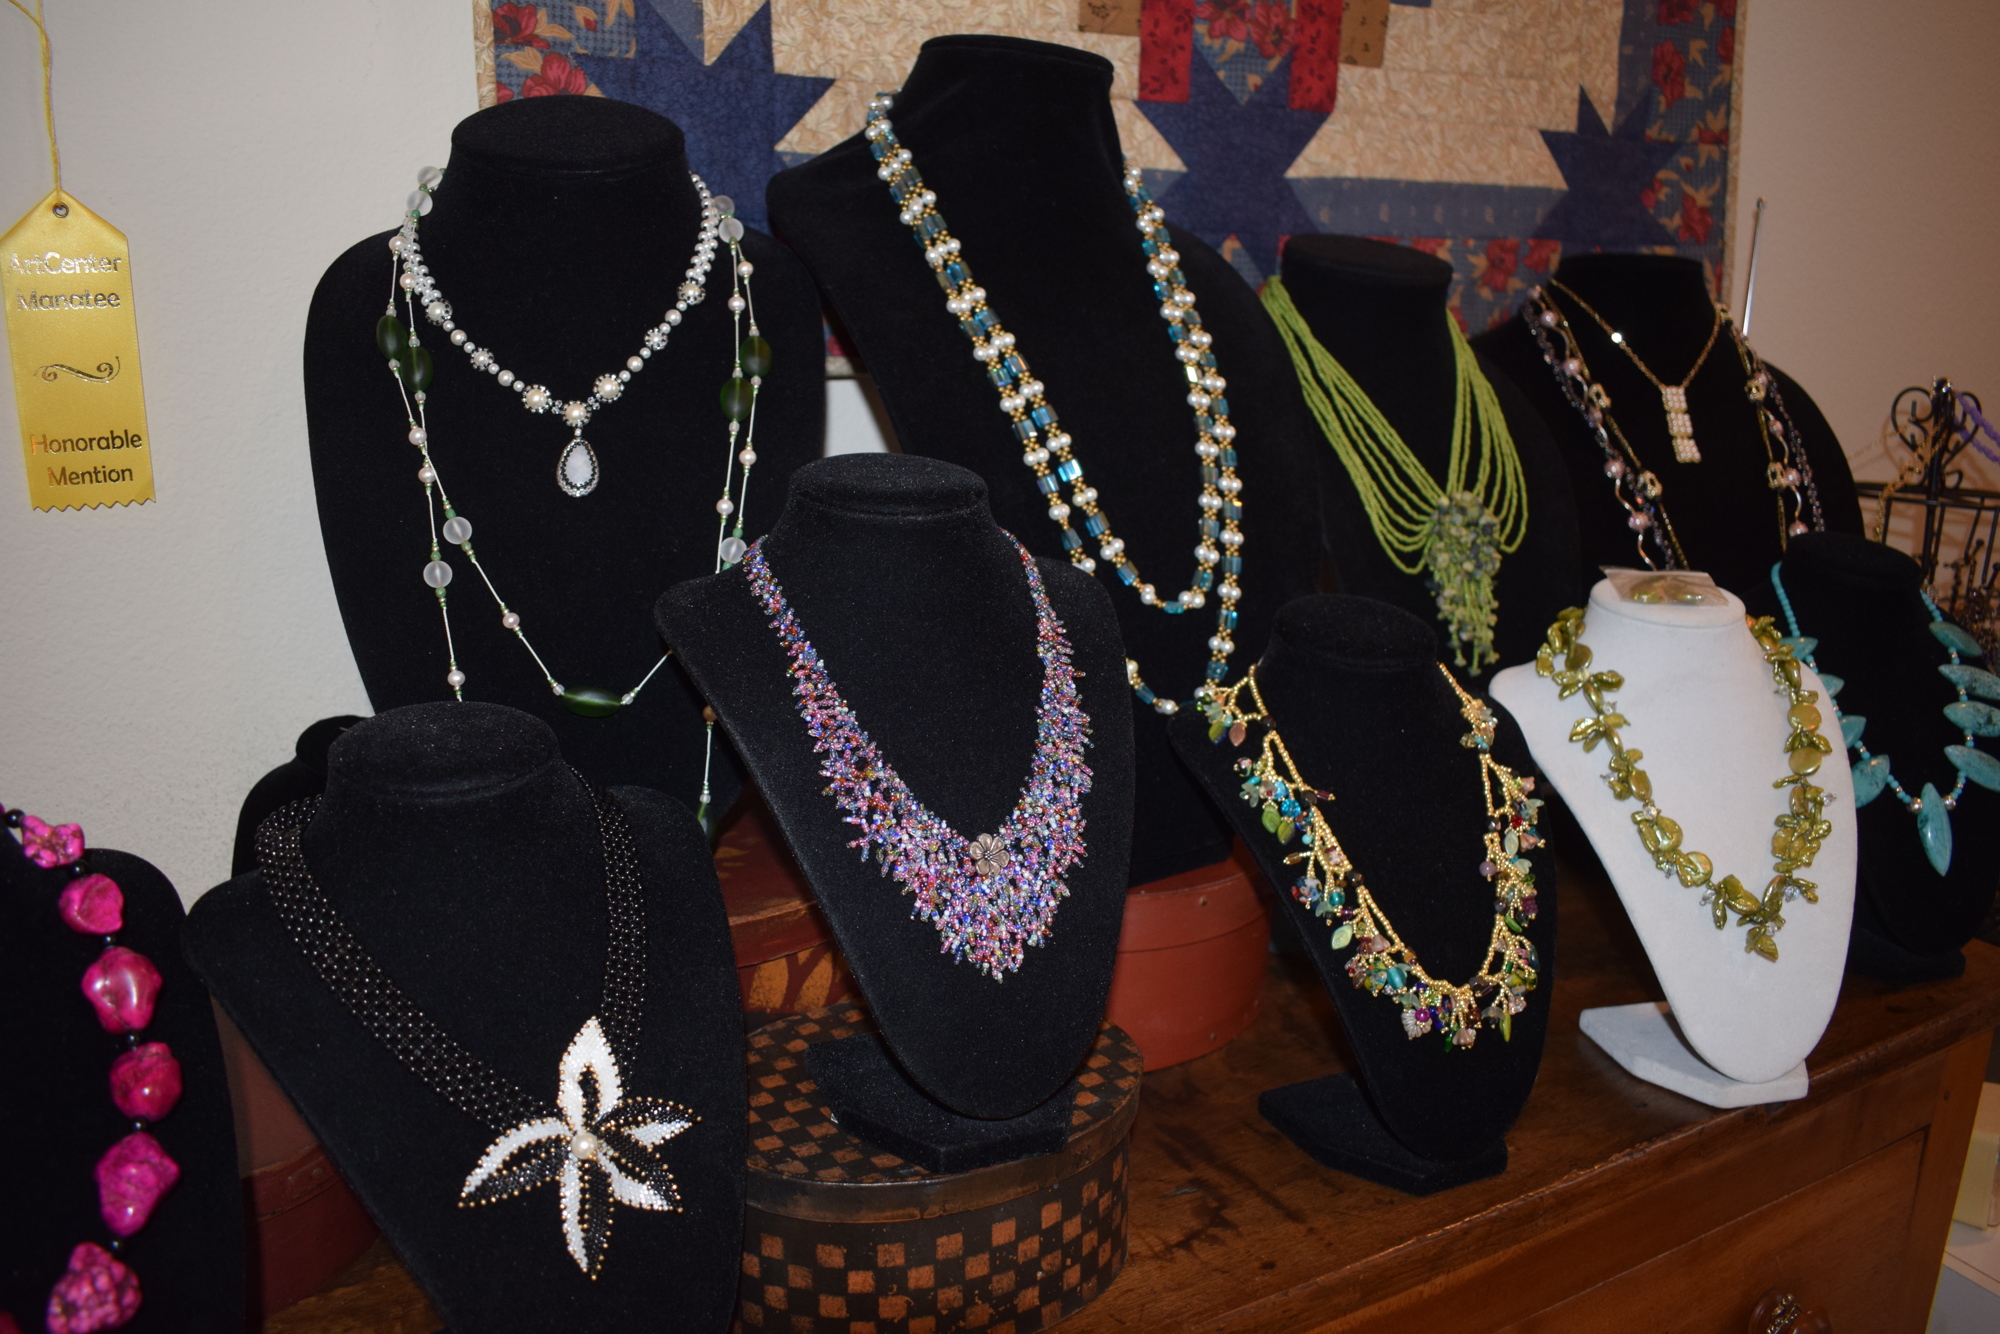 Elaine Vaughn's jewelry will be on display at the Fall Art Show and Sale Nov. 20 at Lakewood Ranch Town Hall.